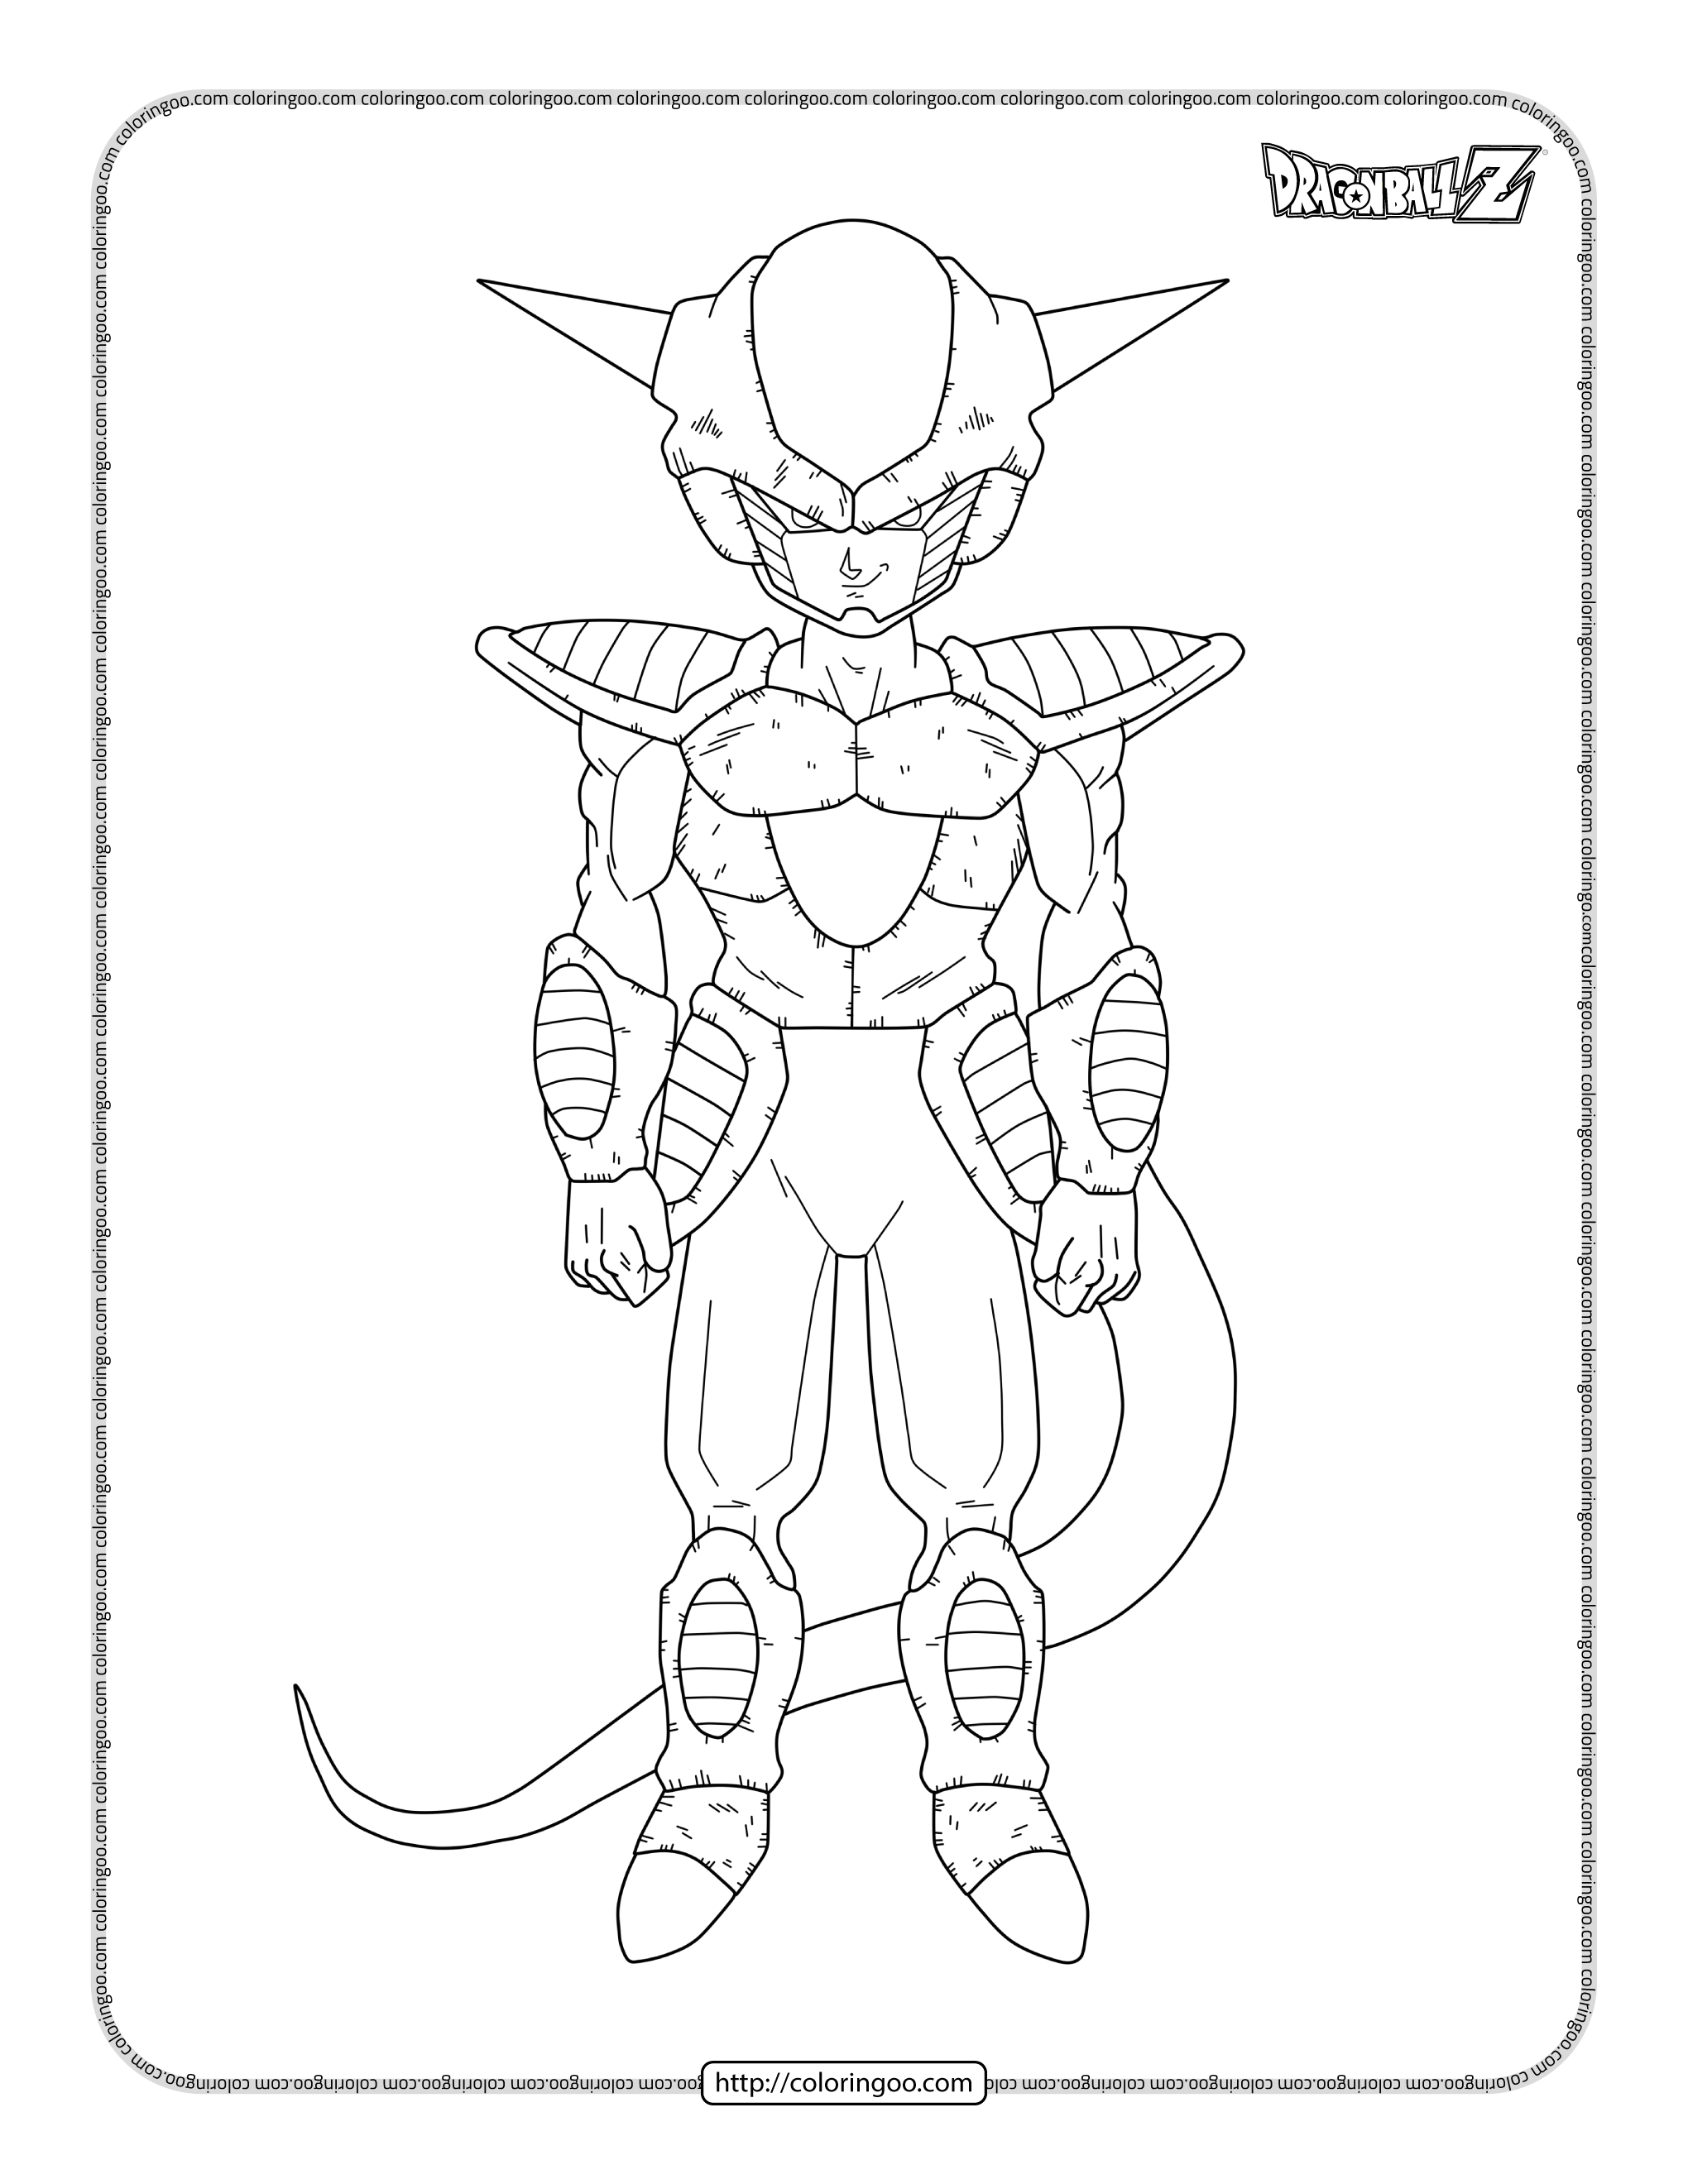 dragonball frost primera forma coloring pages